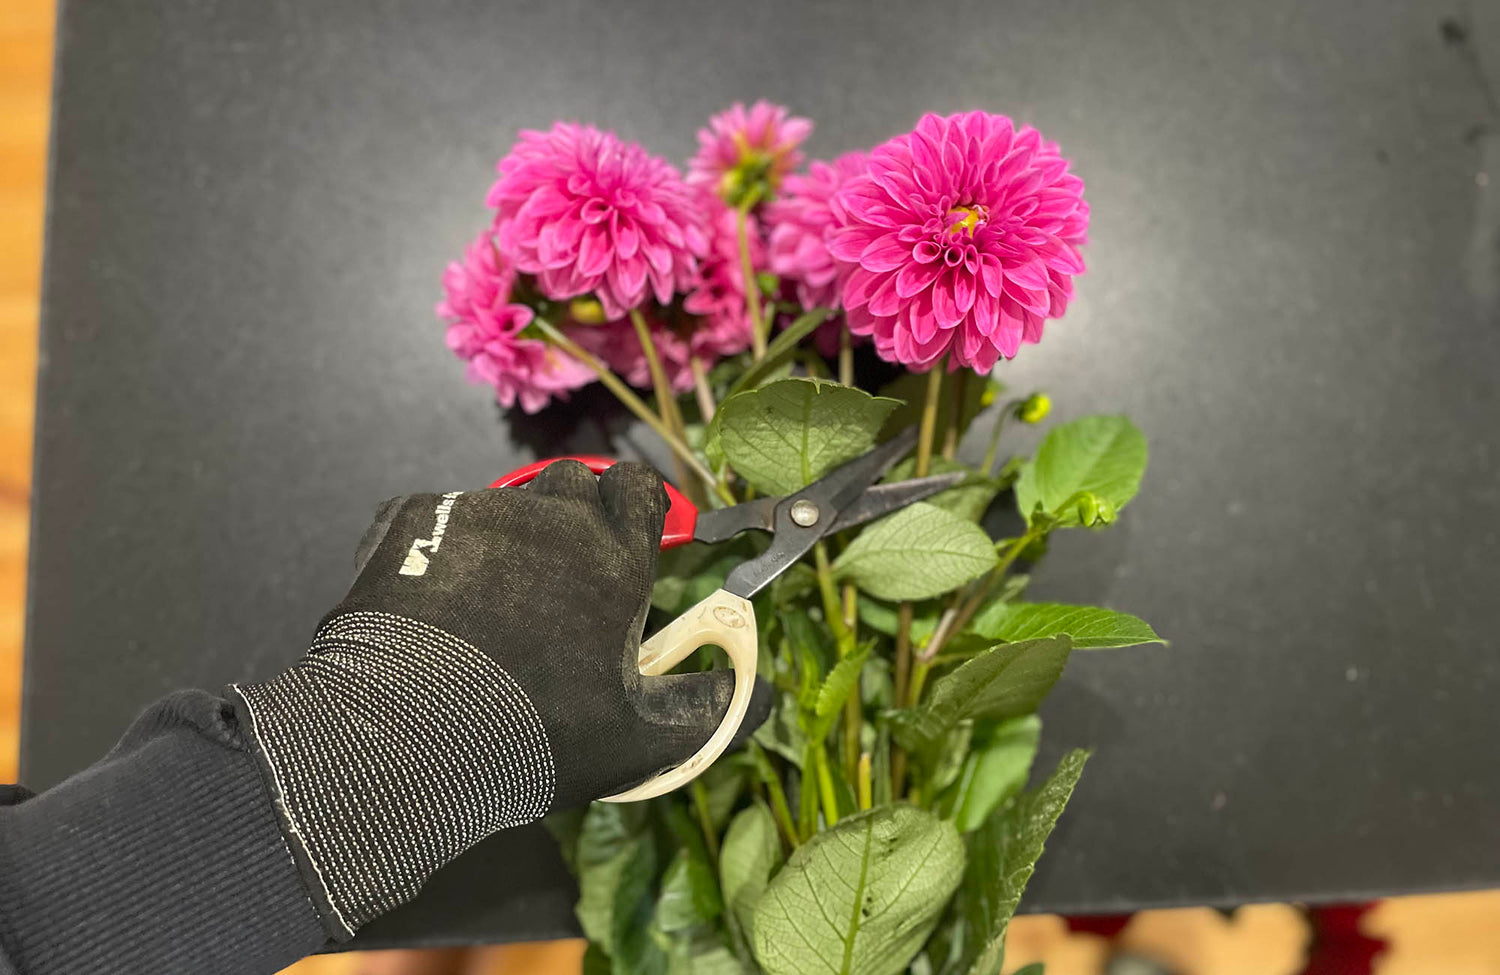 Florist cutting pink flowers on workbench while wearing gloves.